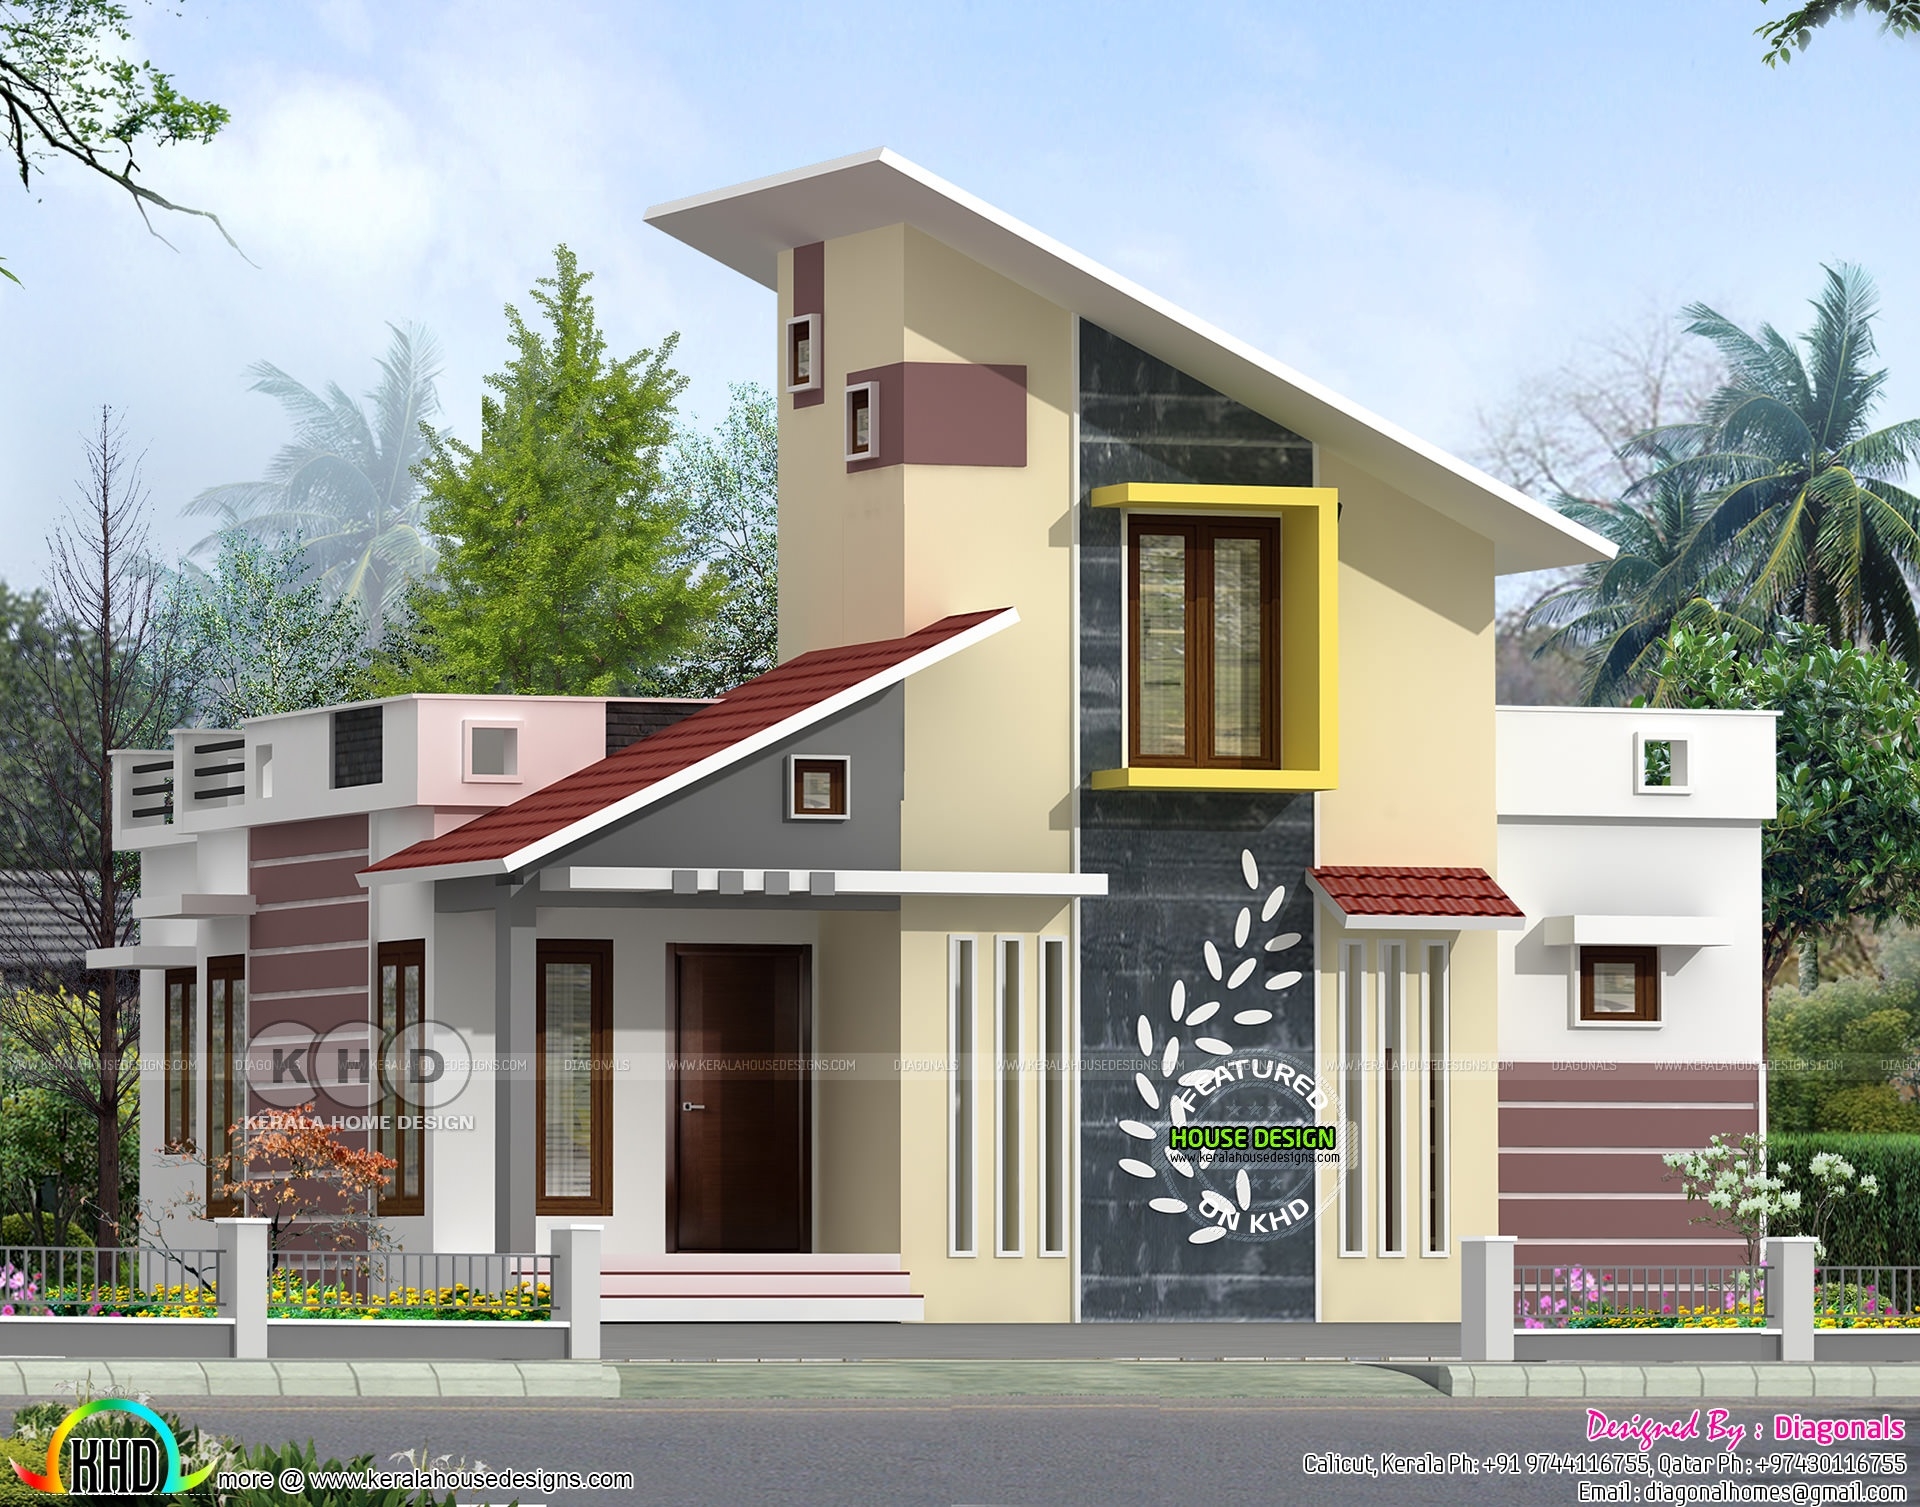 Most inspiring modern single floor 3 bhk home 1200 sq ft kerala home design and in 1200 sq ft house plans modern